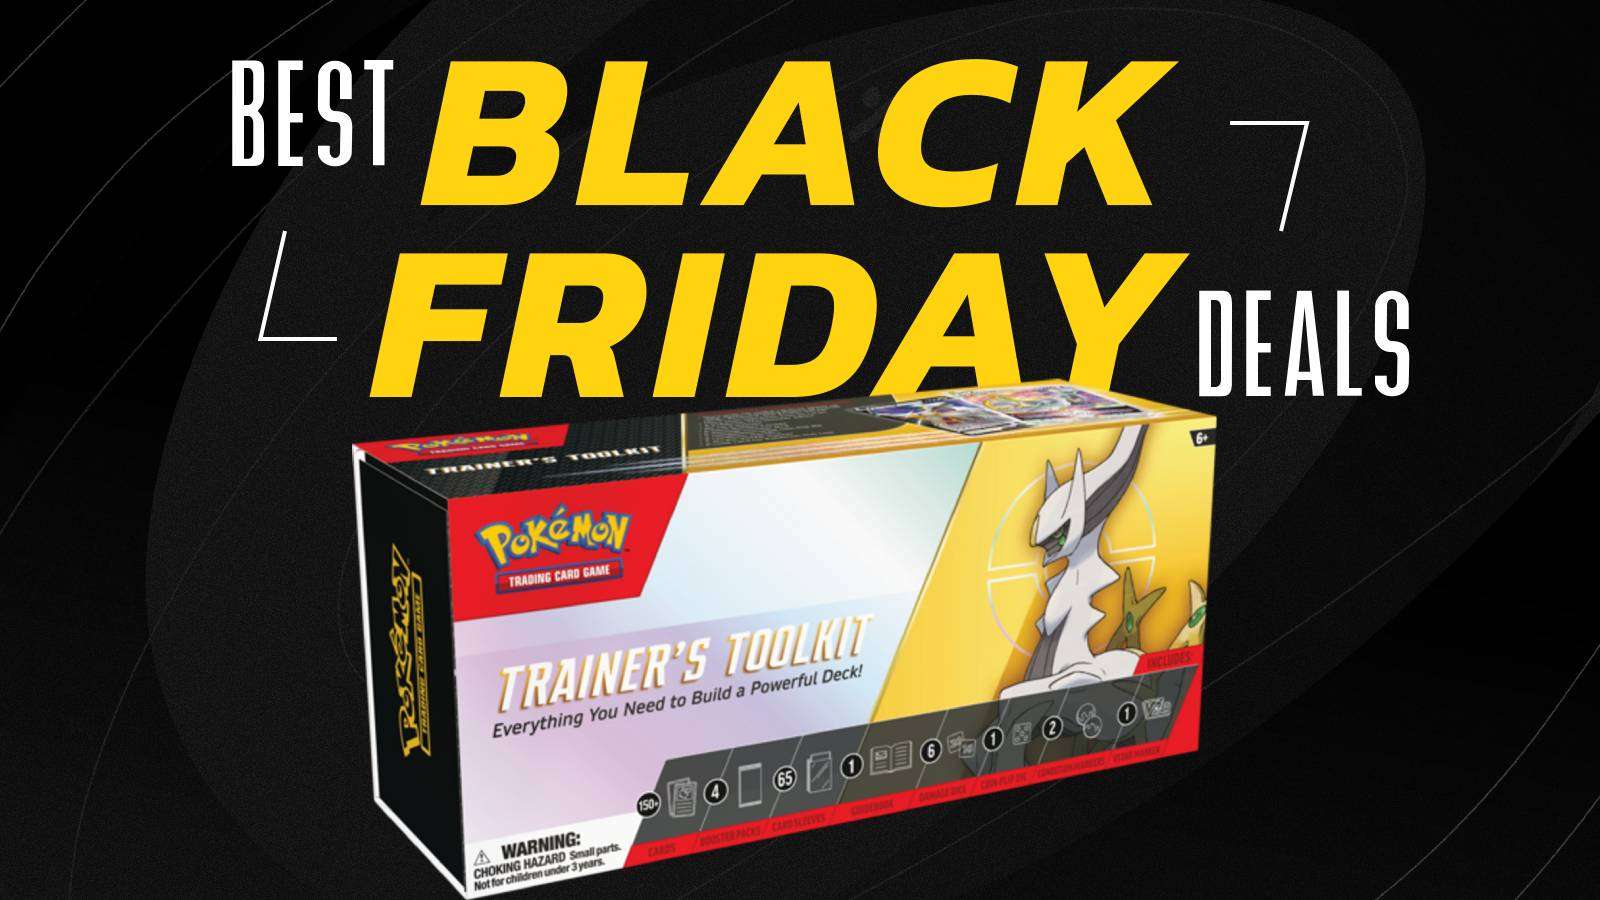 The Pokemon TCG Trainers Toolkit 2023 is featured below text reading Best Black Friday Deals 2023